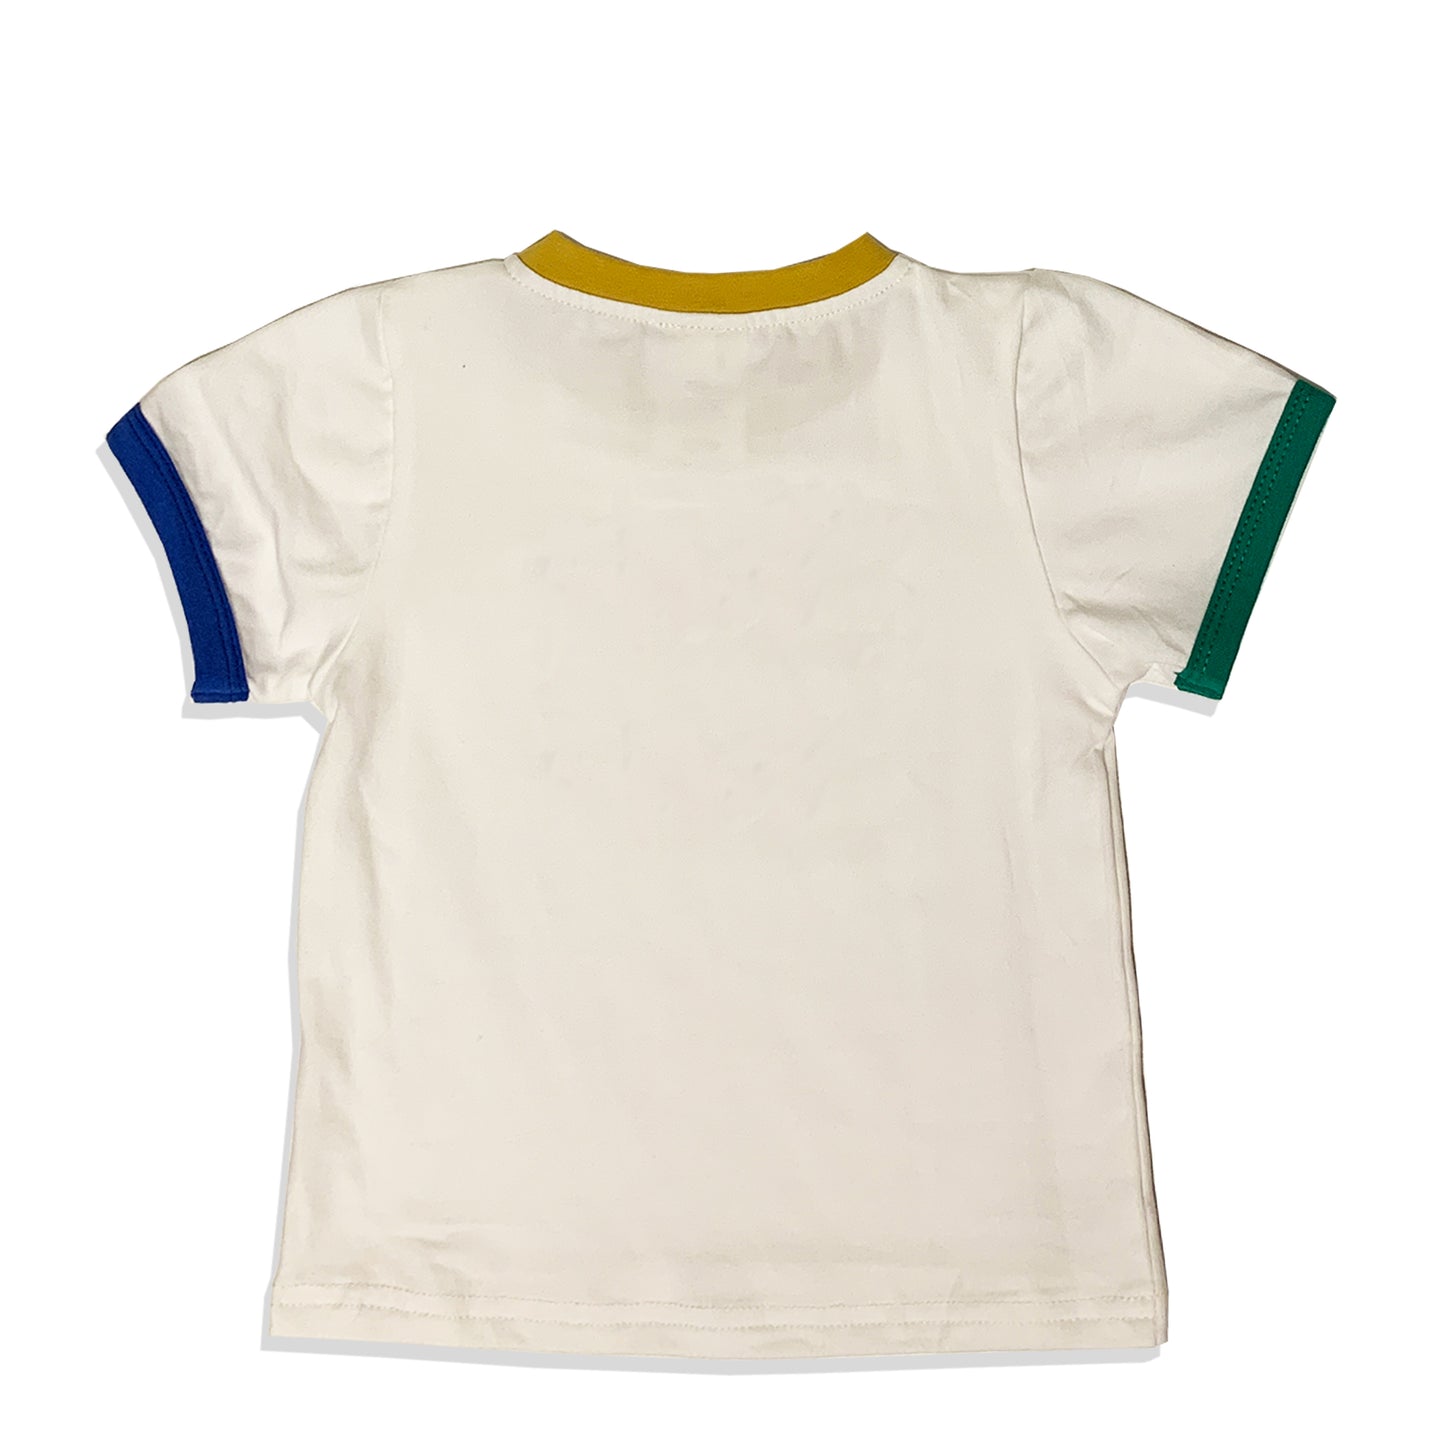 BORN TO PLAY OUTDOORS KIDS T-SHIRT - IVORY